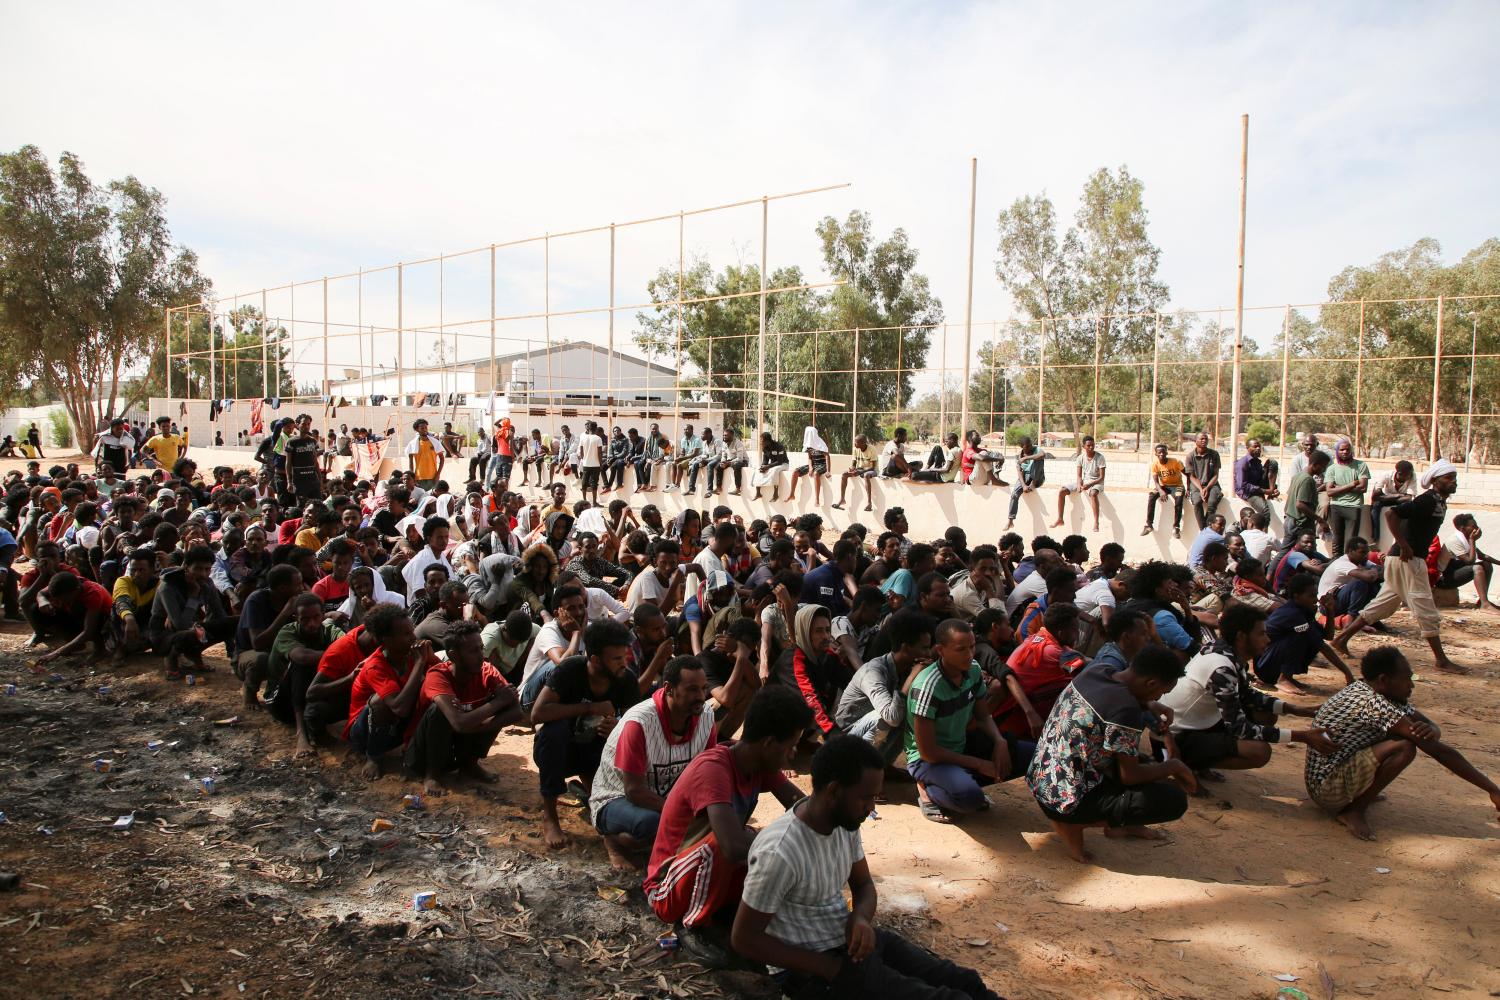 Migrants gather at a detention center at Ain Zara, in Tripoli, Libya October 12, 2021. REUTERS/Hazem Ahmed